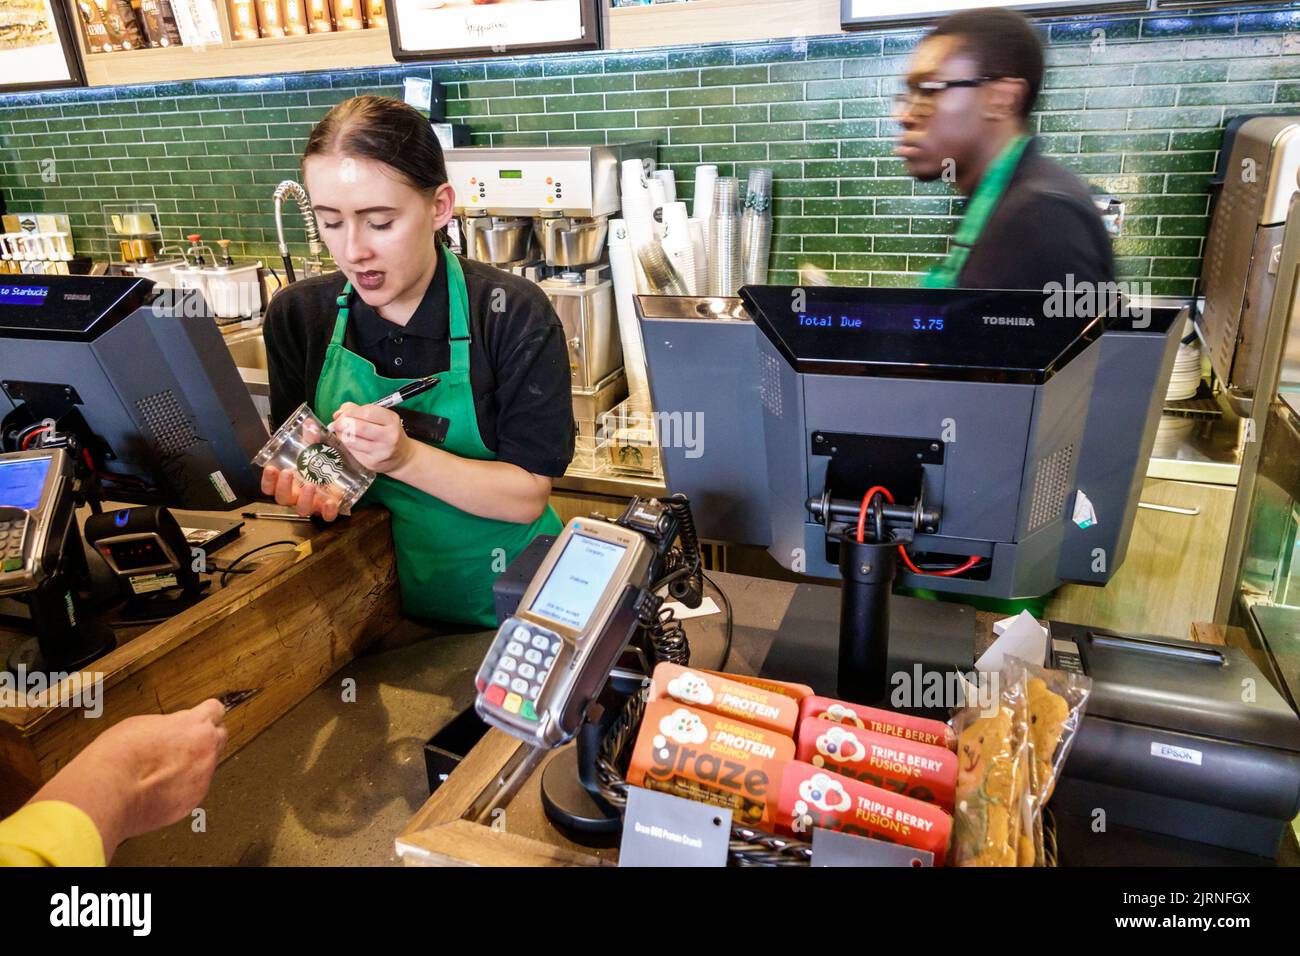 London England,UK Starbucks Coffee inside interior counter,Black man woman writing order on cup barista baristas workers,employees Stock Photo